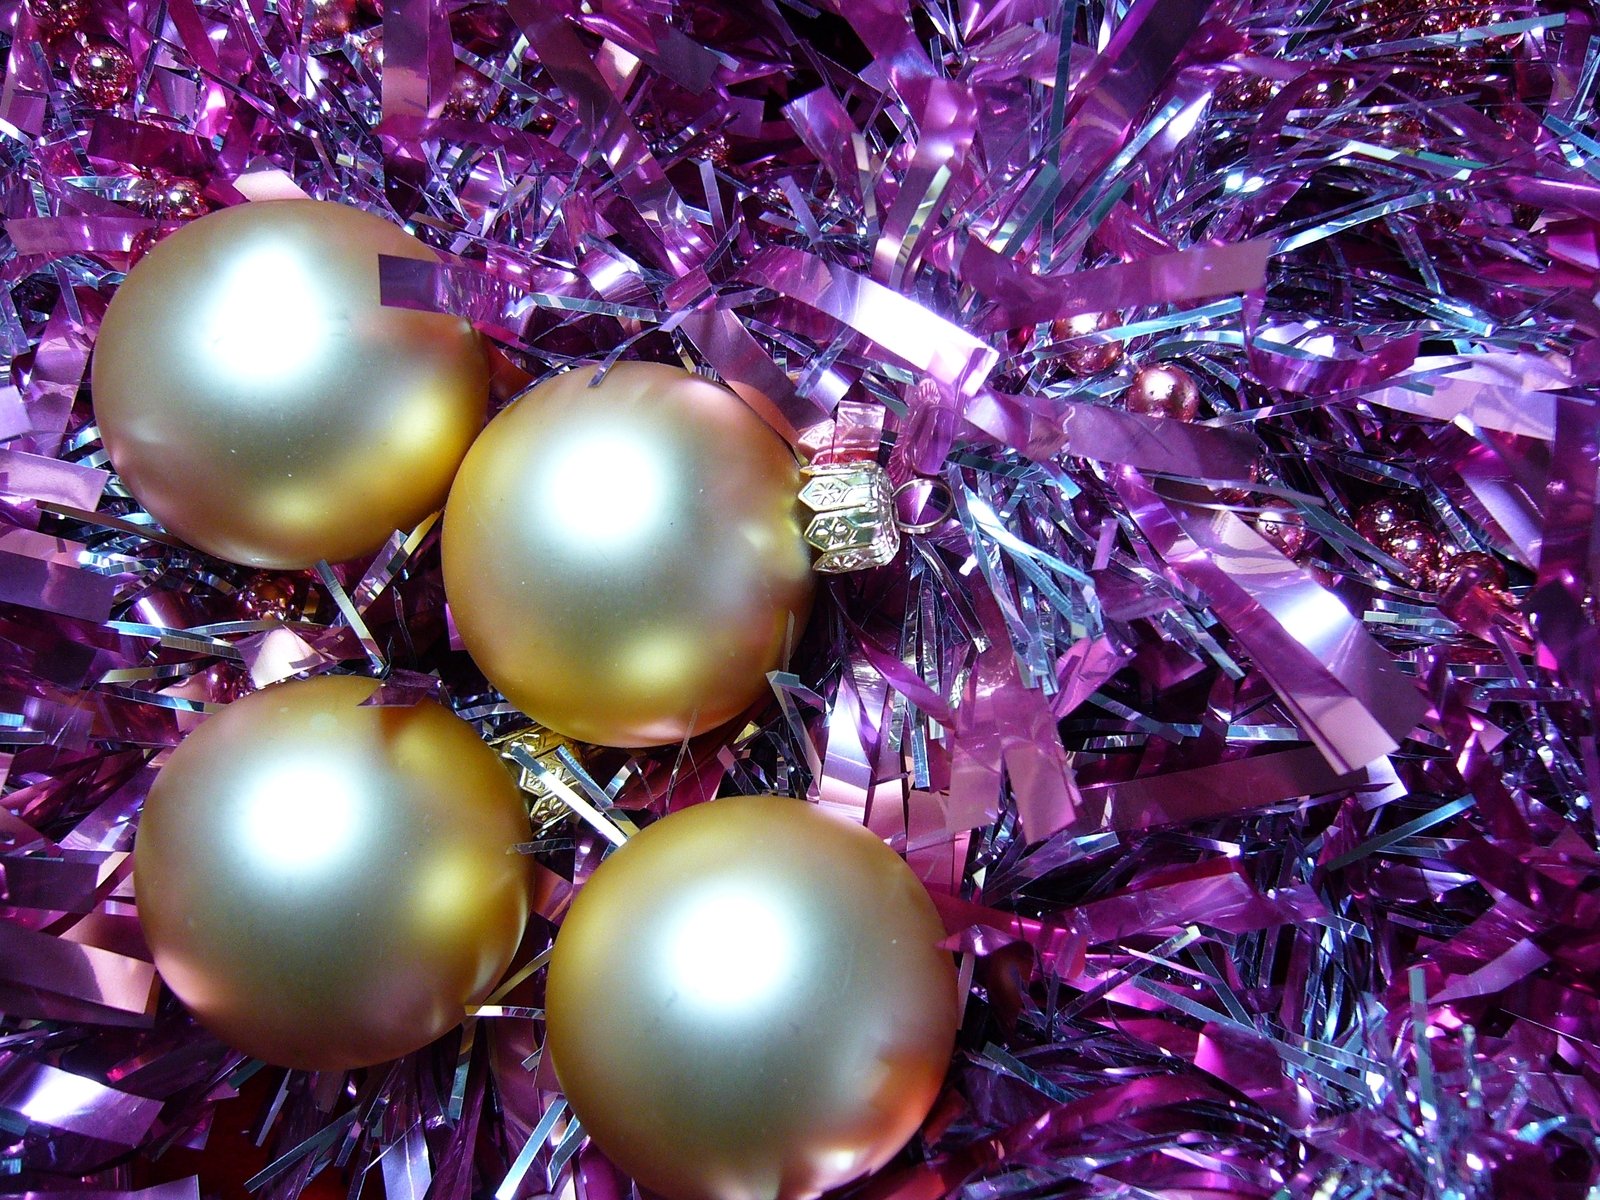 a close up s of christmas ornaments with purple tinsel